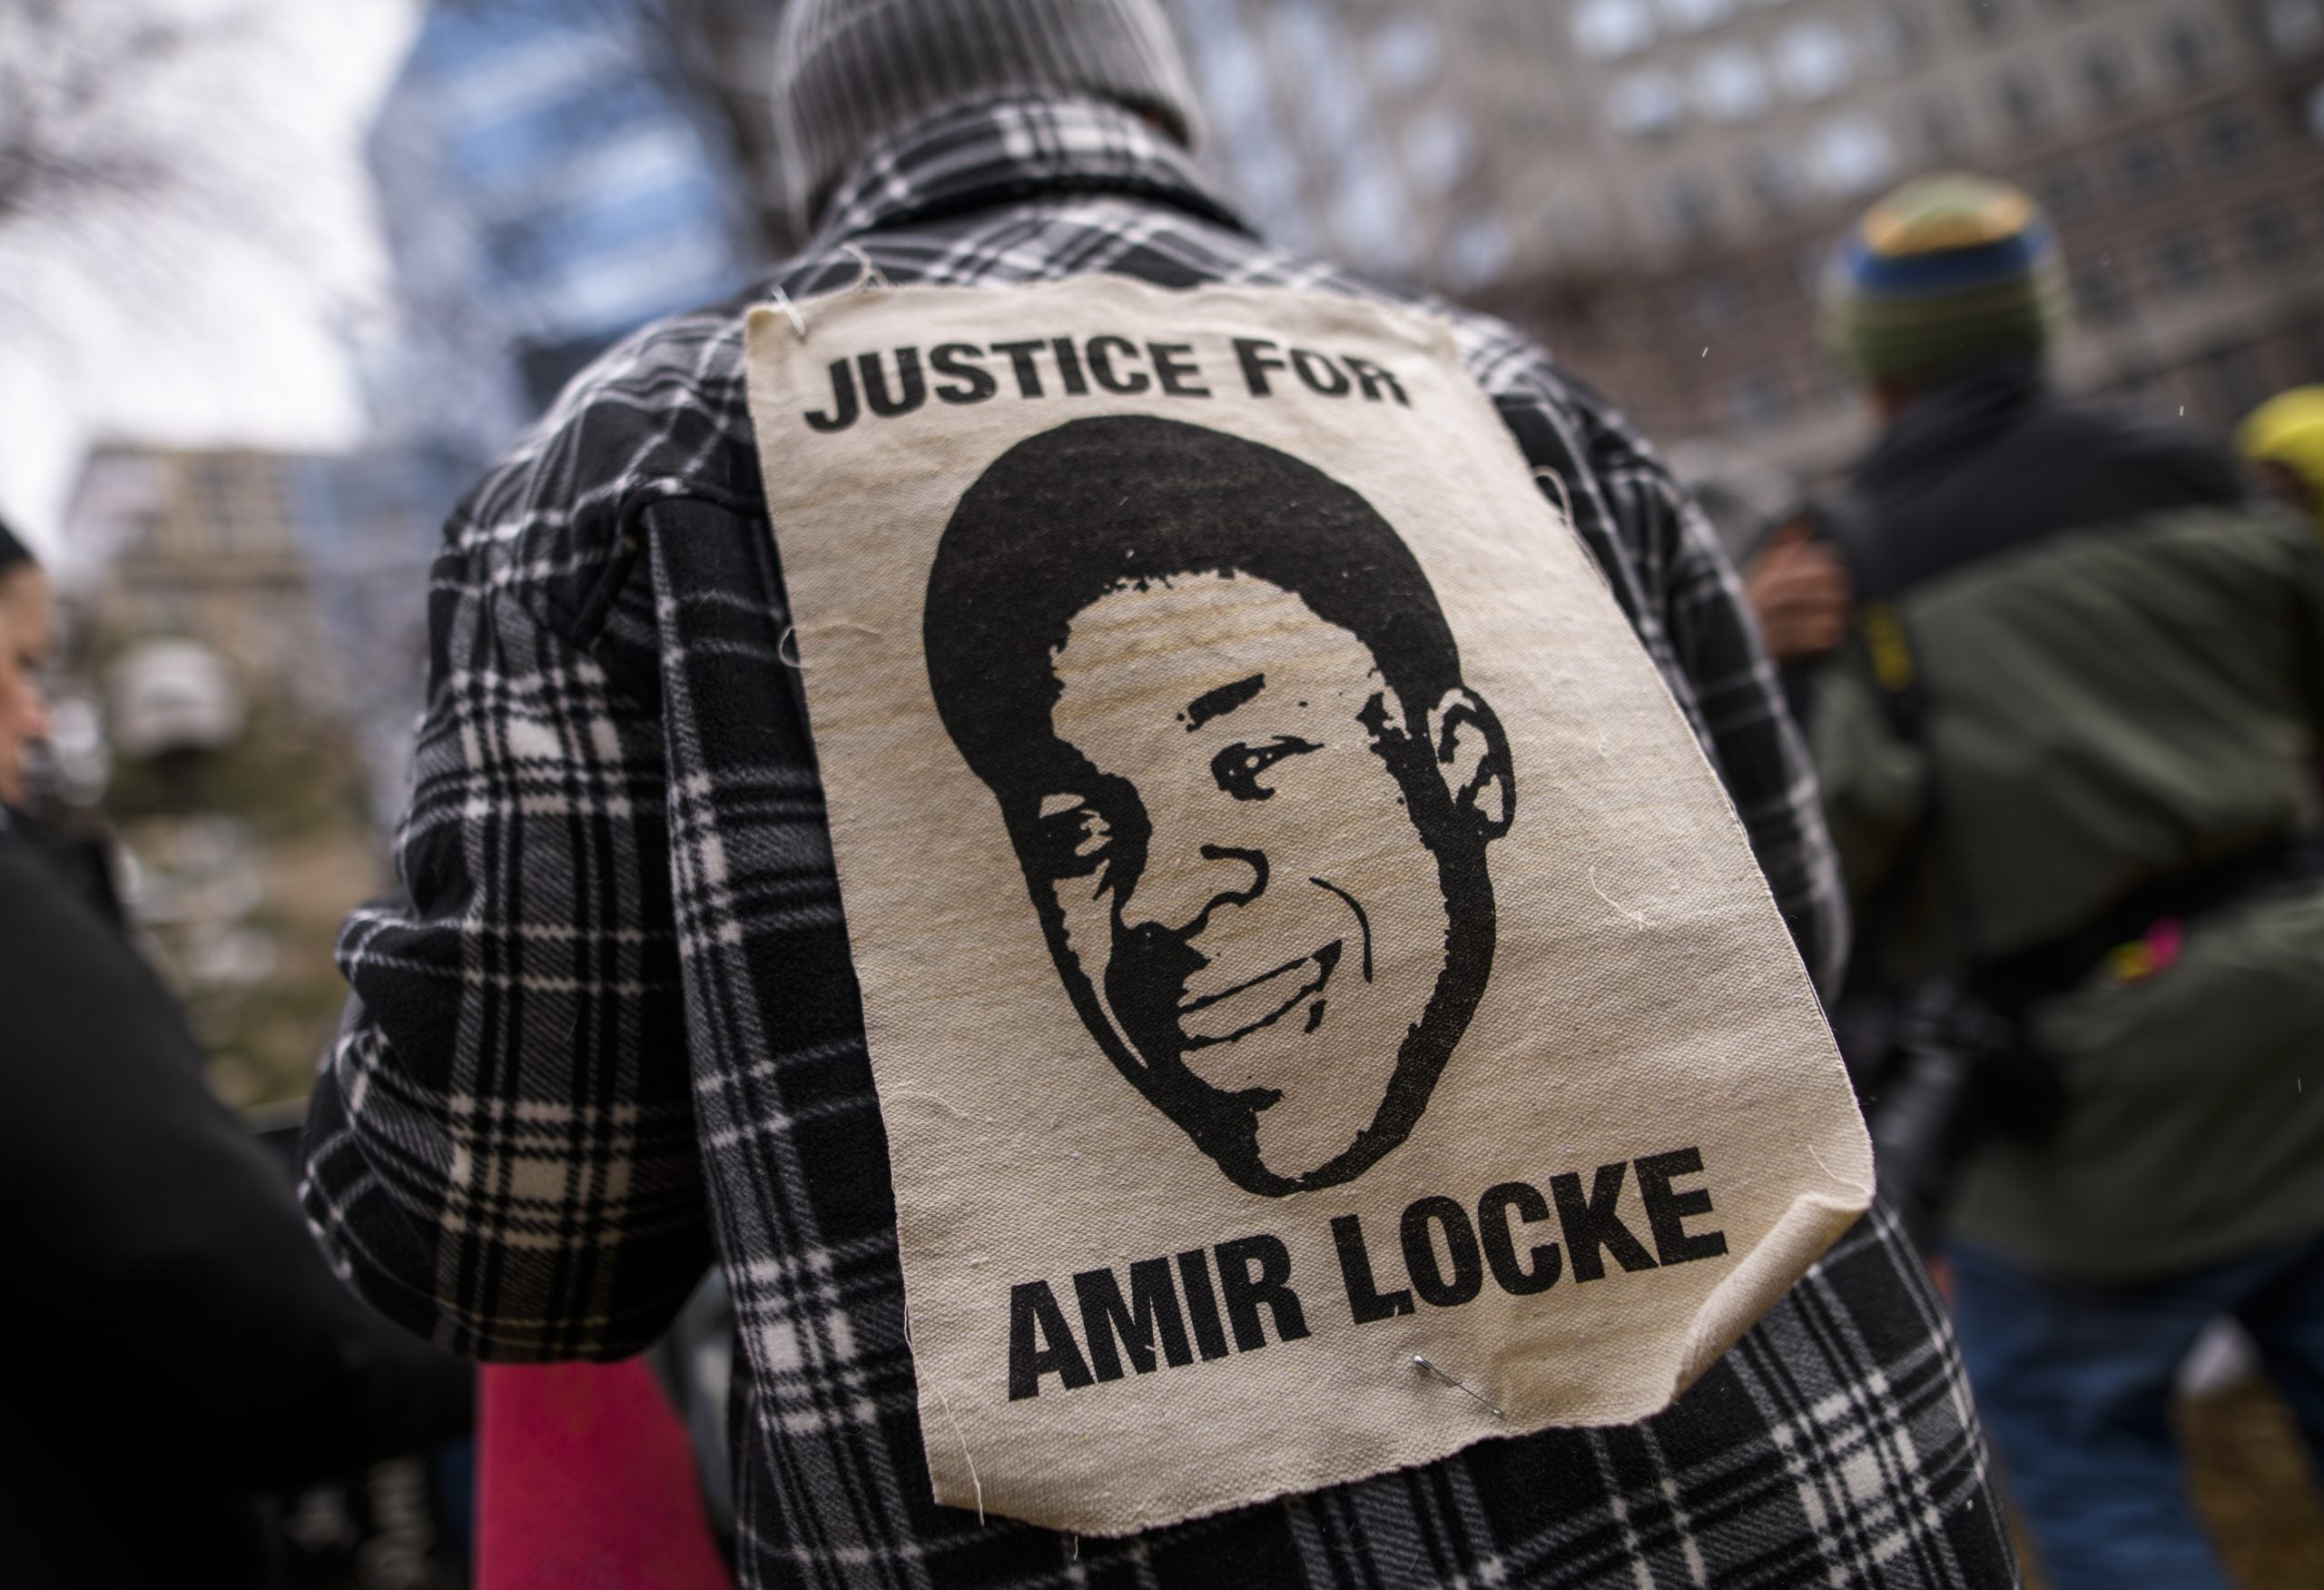 ￼Amir Locke’s Teen Cousin Pleads Guilty In Killing That Led To Deadly Raid